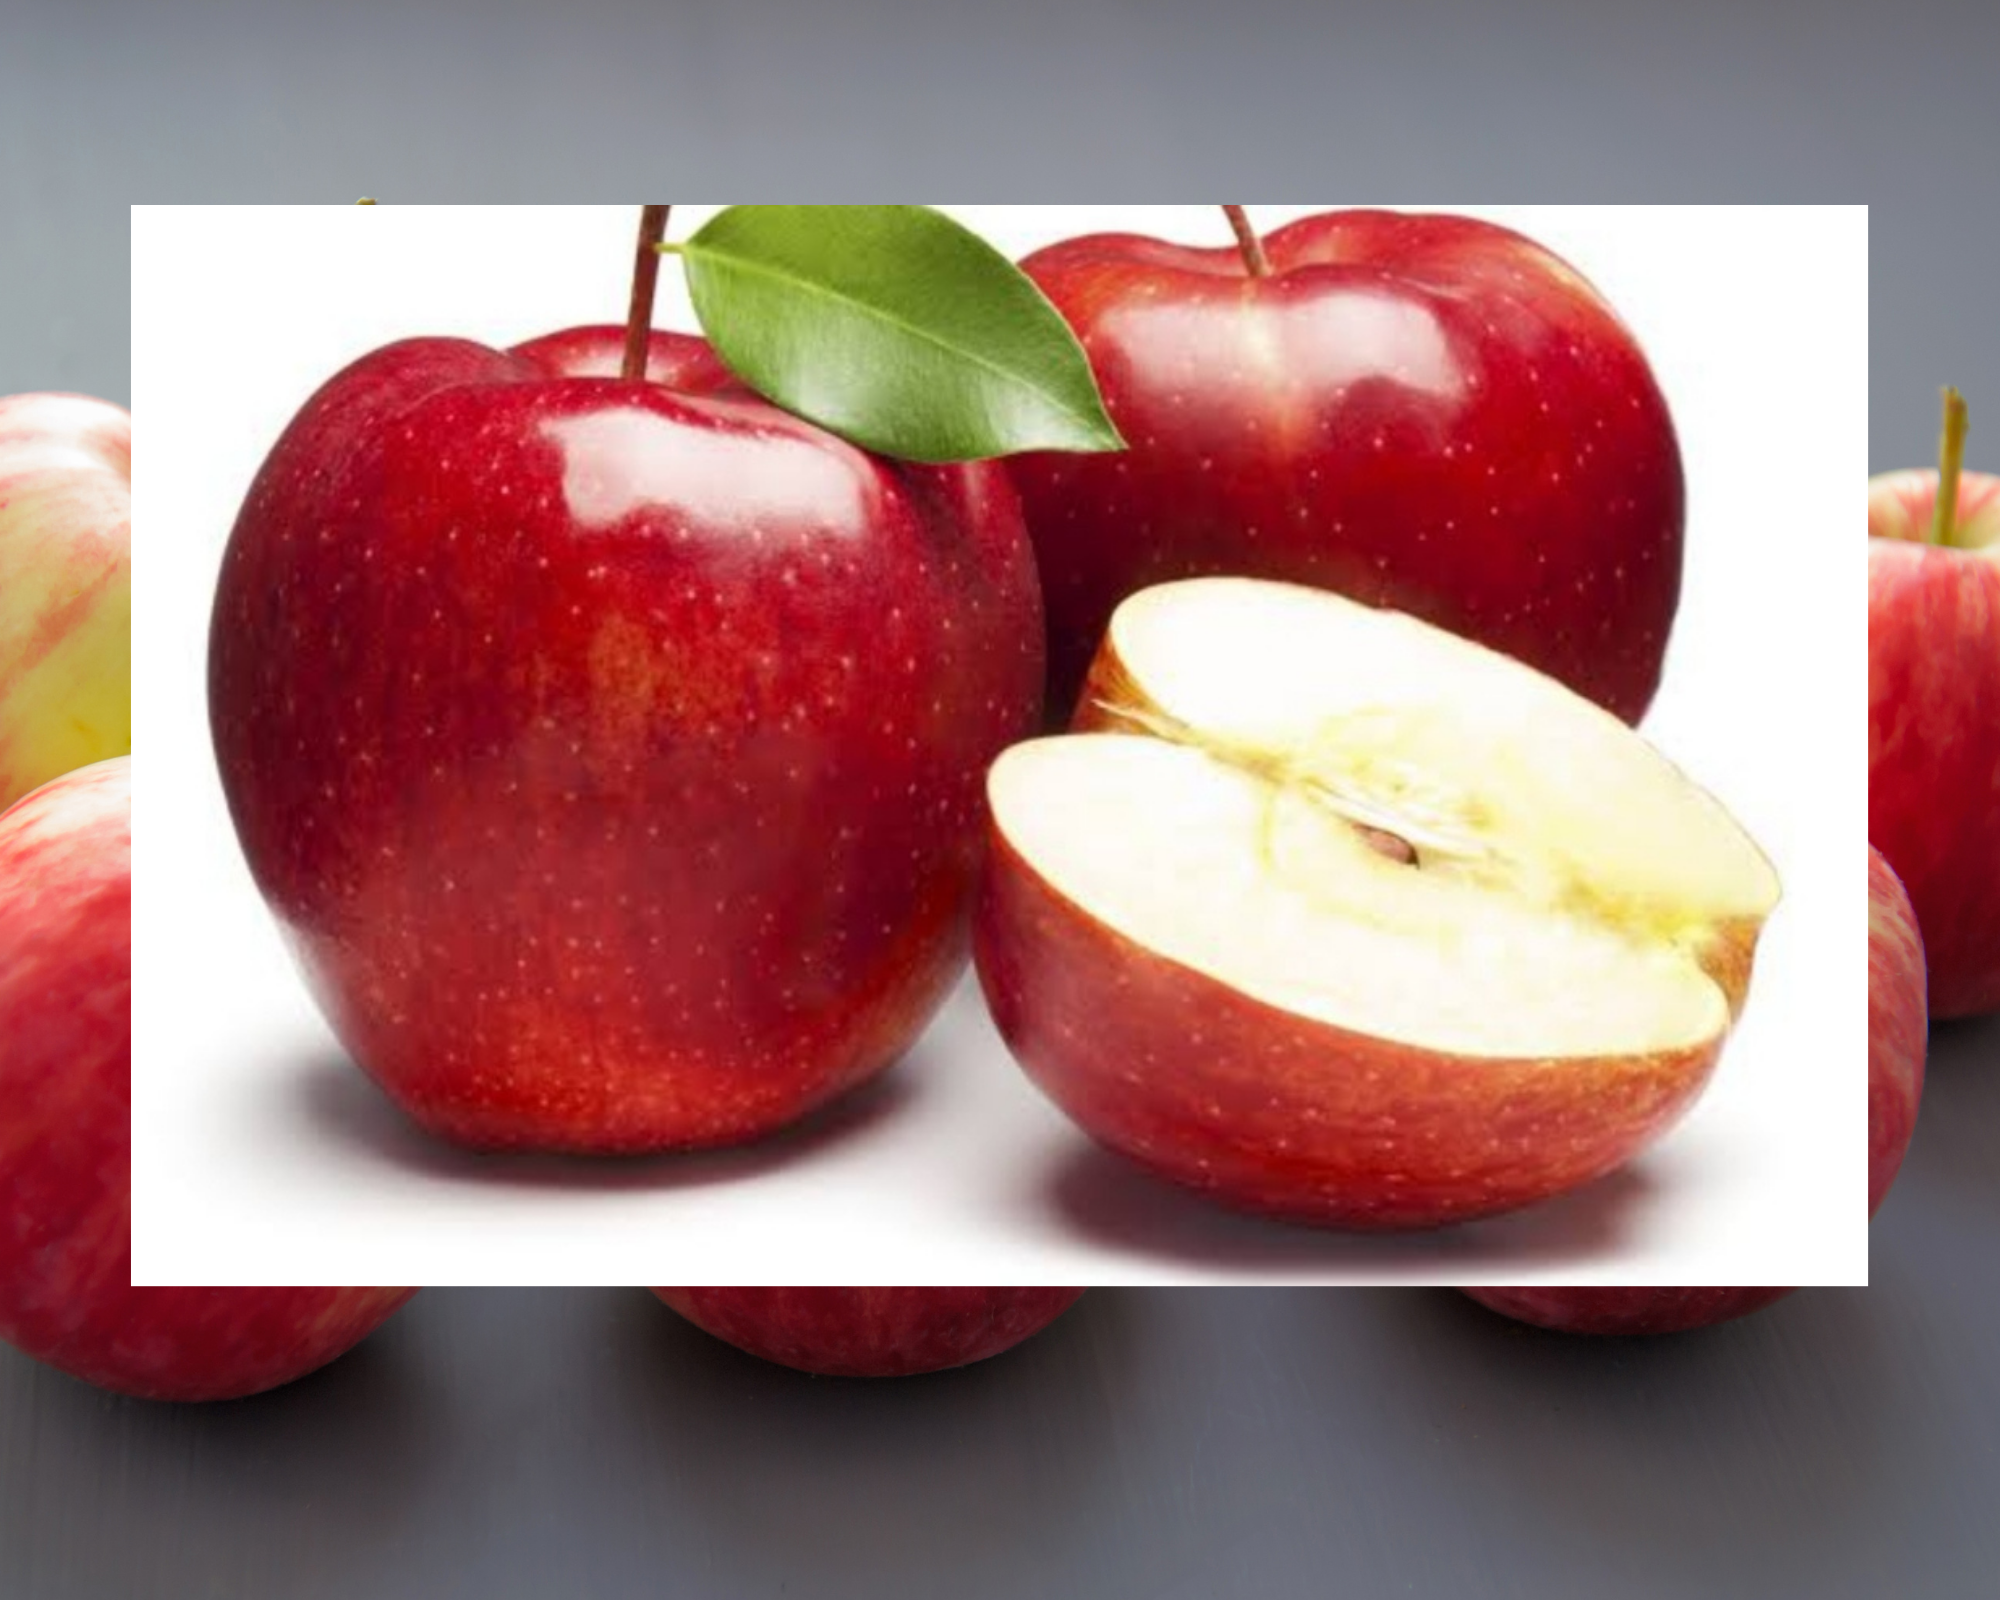 Essential health benefits of apples